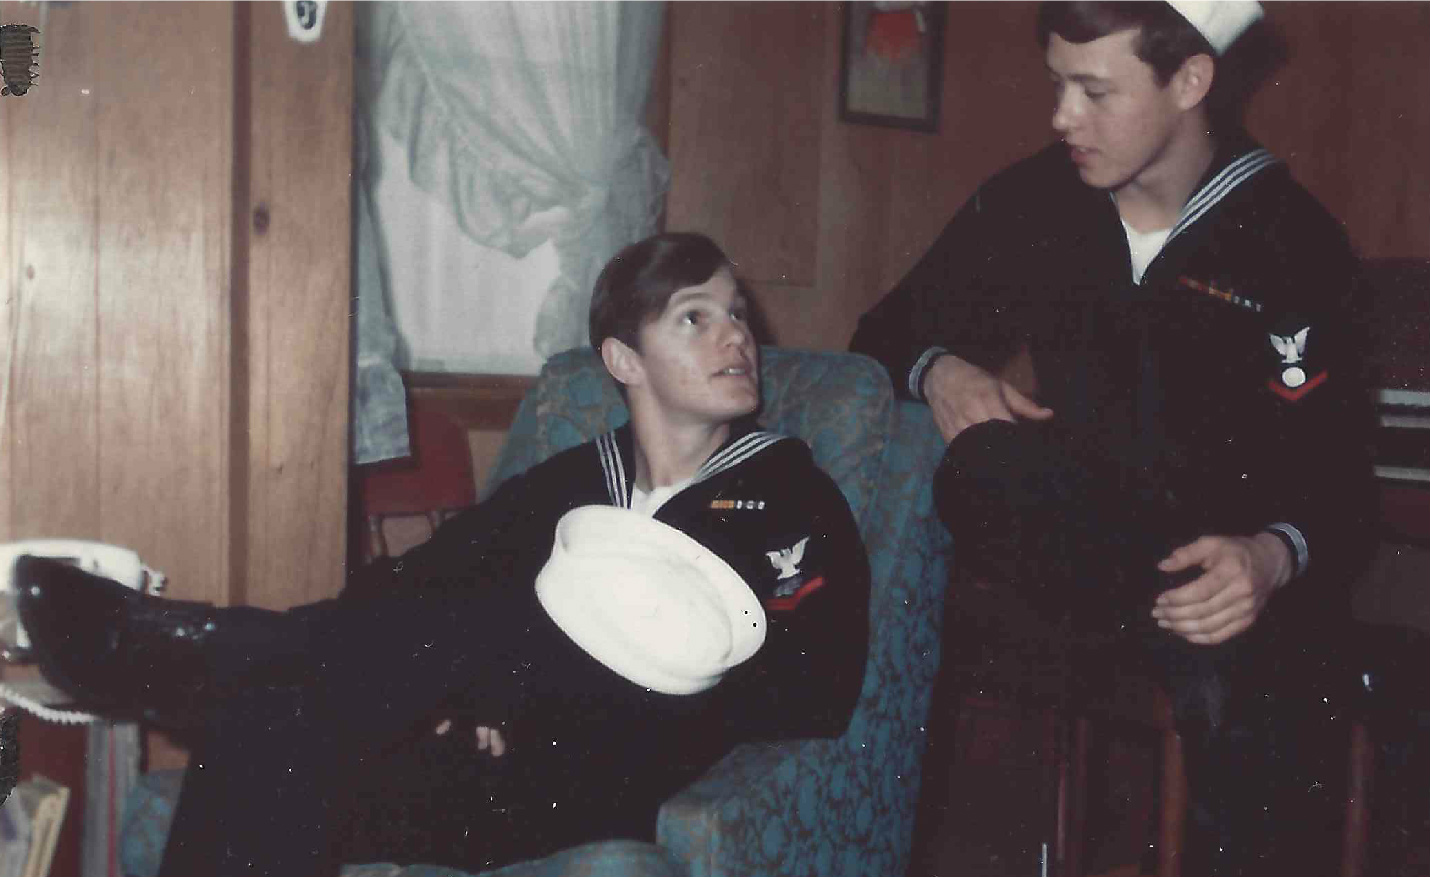 Brothers, Mike Young sitting down in blue chair, Dan Young on right. They both served at the same time and after a year of requests they were able to serve together on the U.S.S. Chicago in 1969 to 1970.